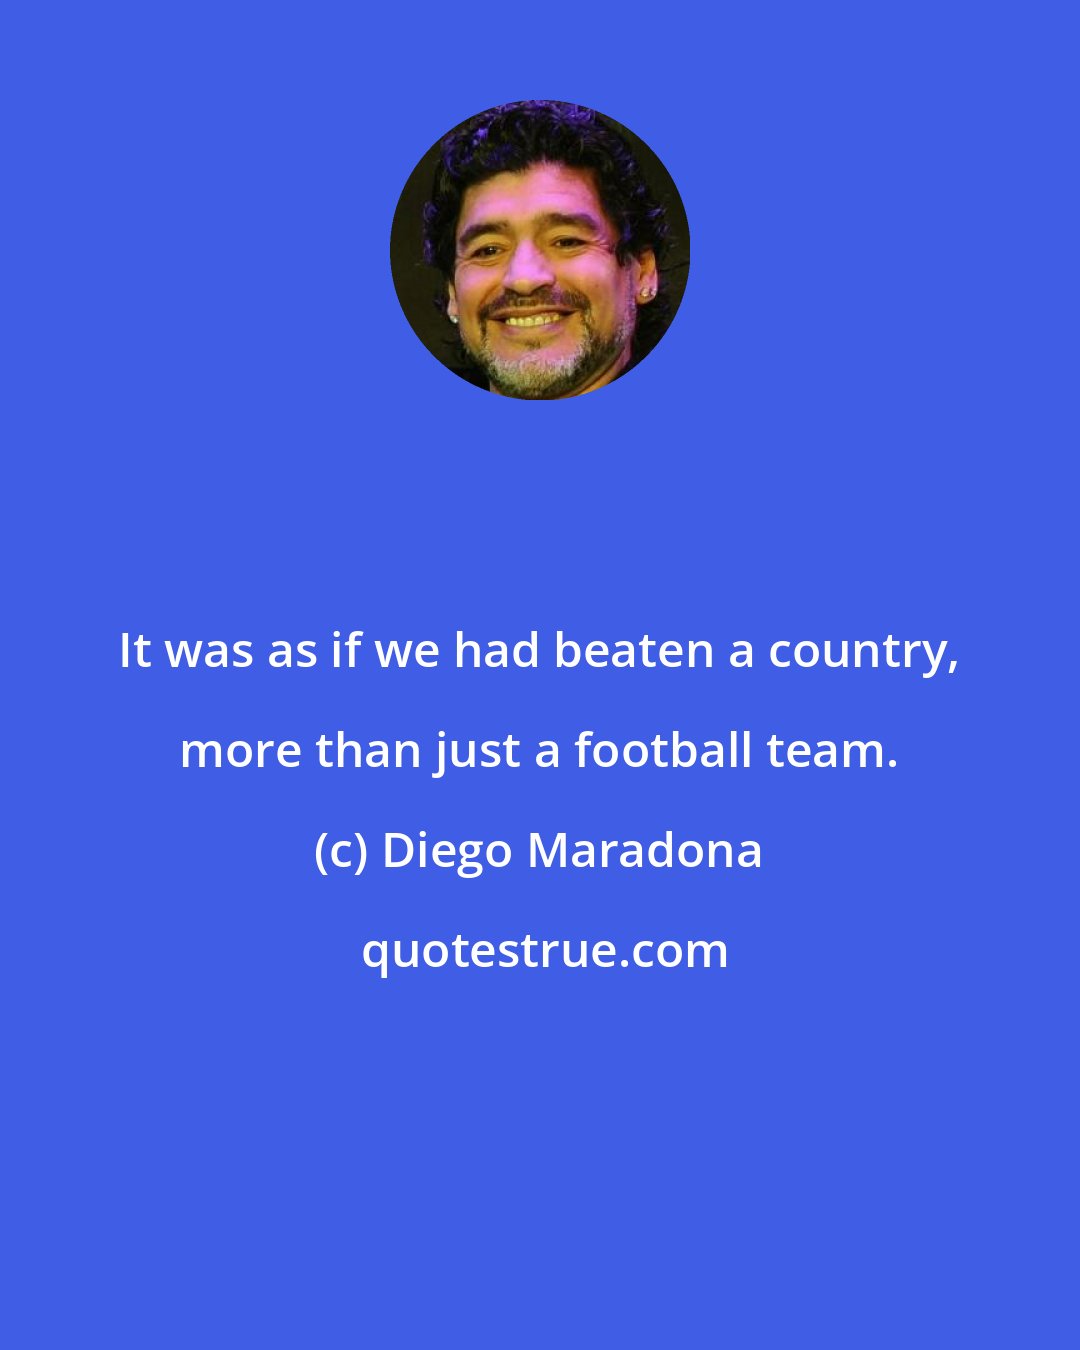 Diego Maradona: It was as if we had beaten a country, more than just a football team.